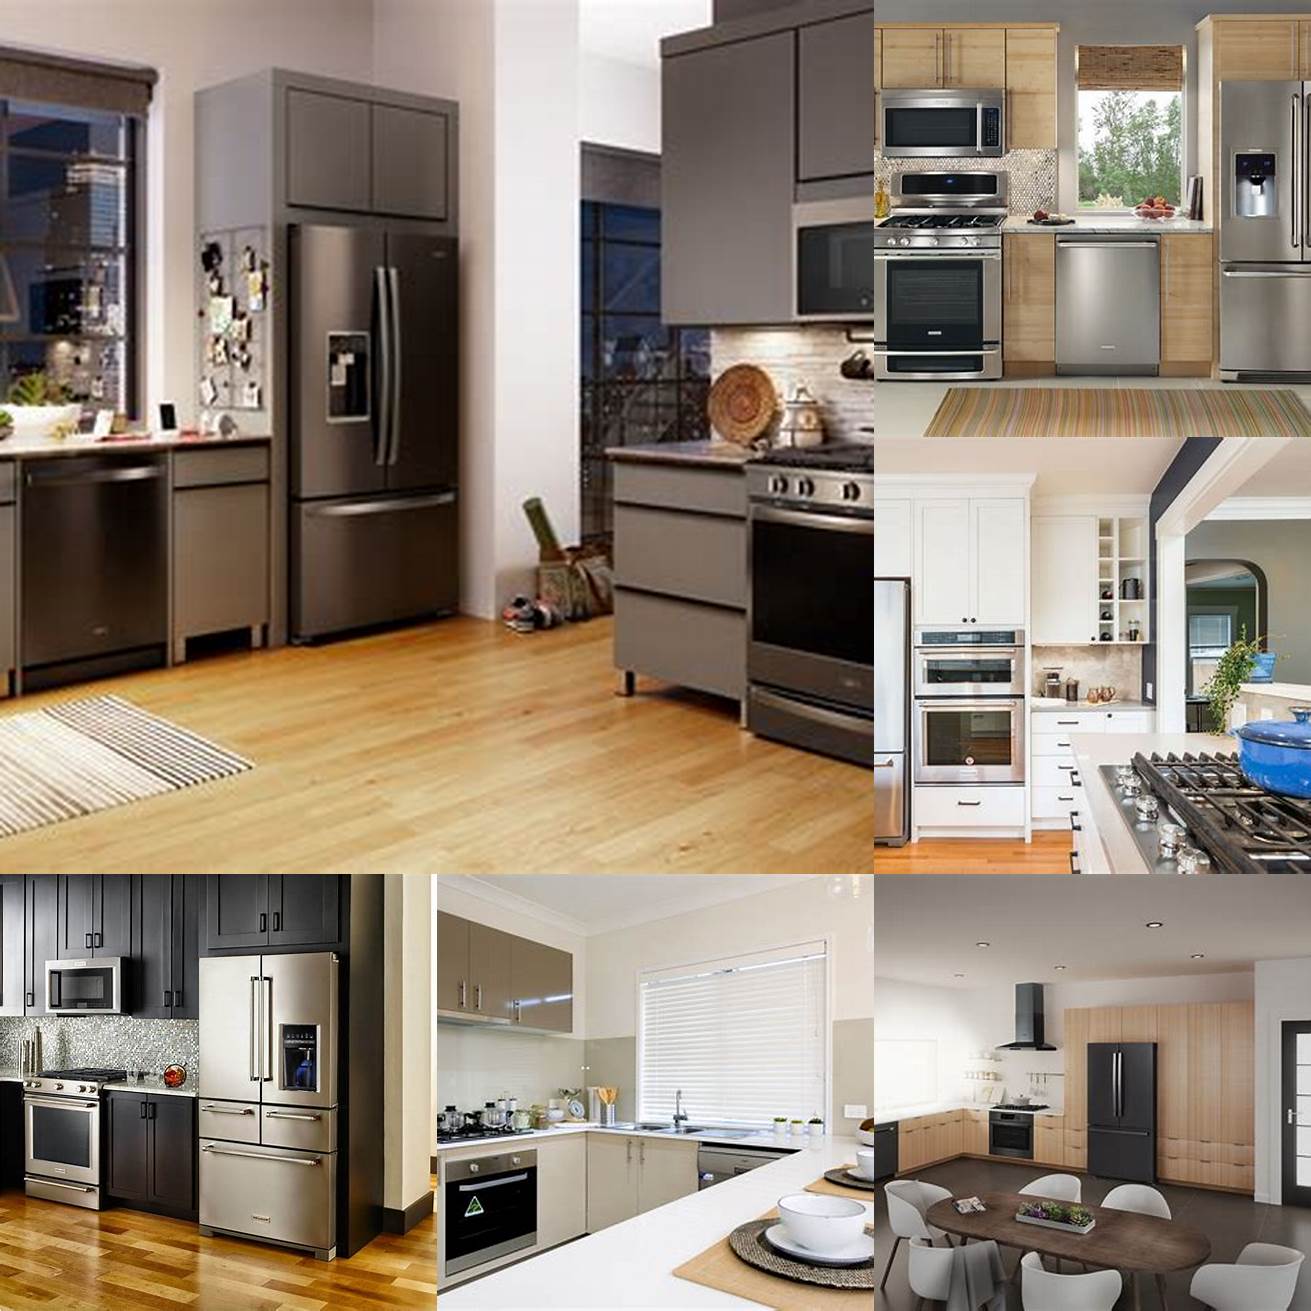 Stainless steel appliances give your kitchen a sleek modern look